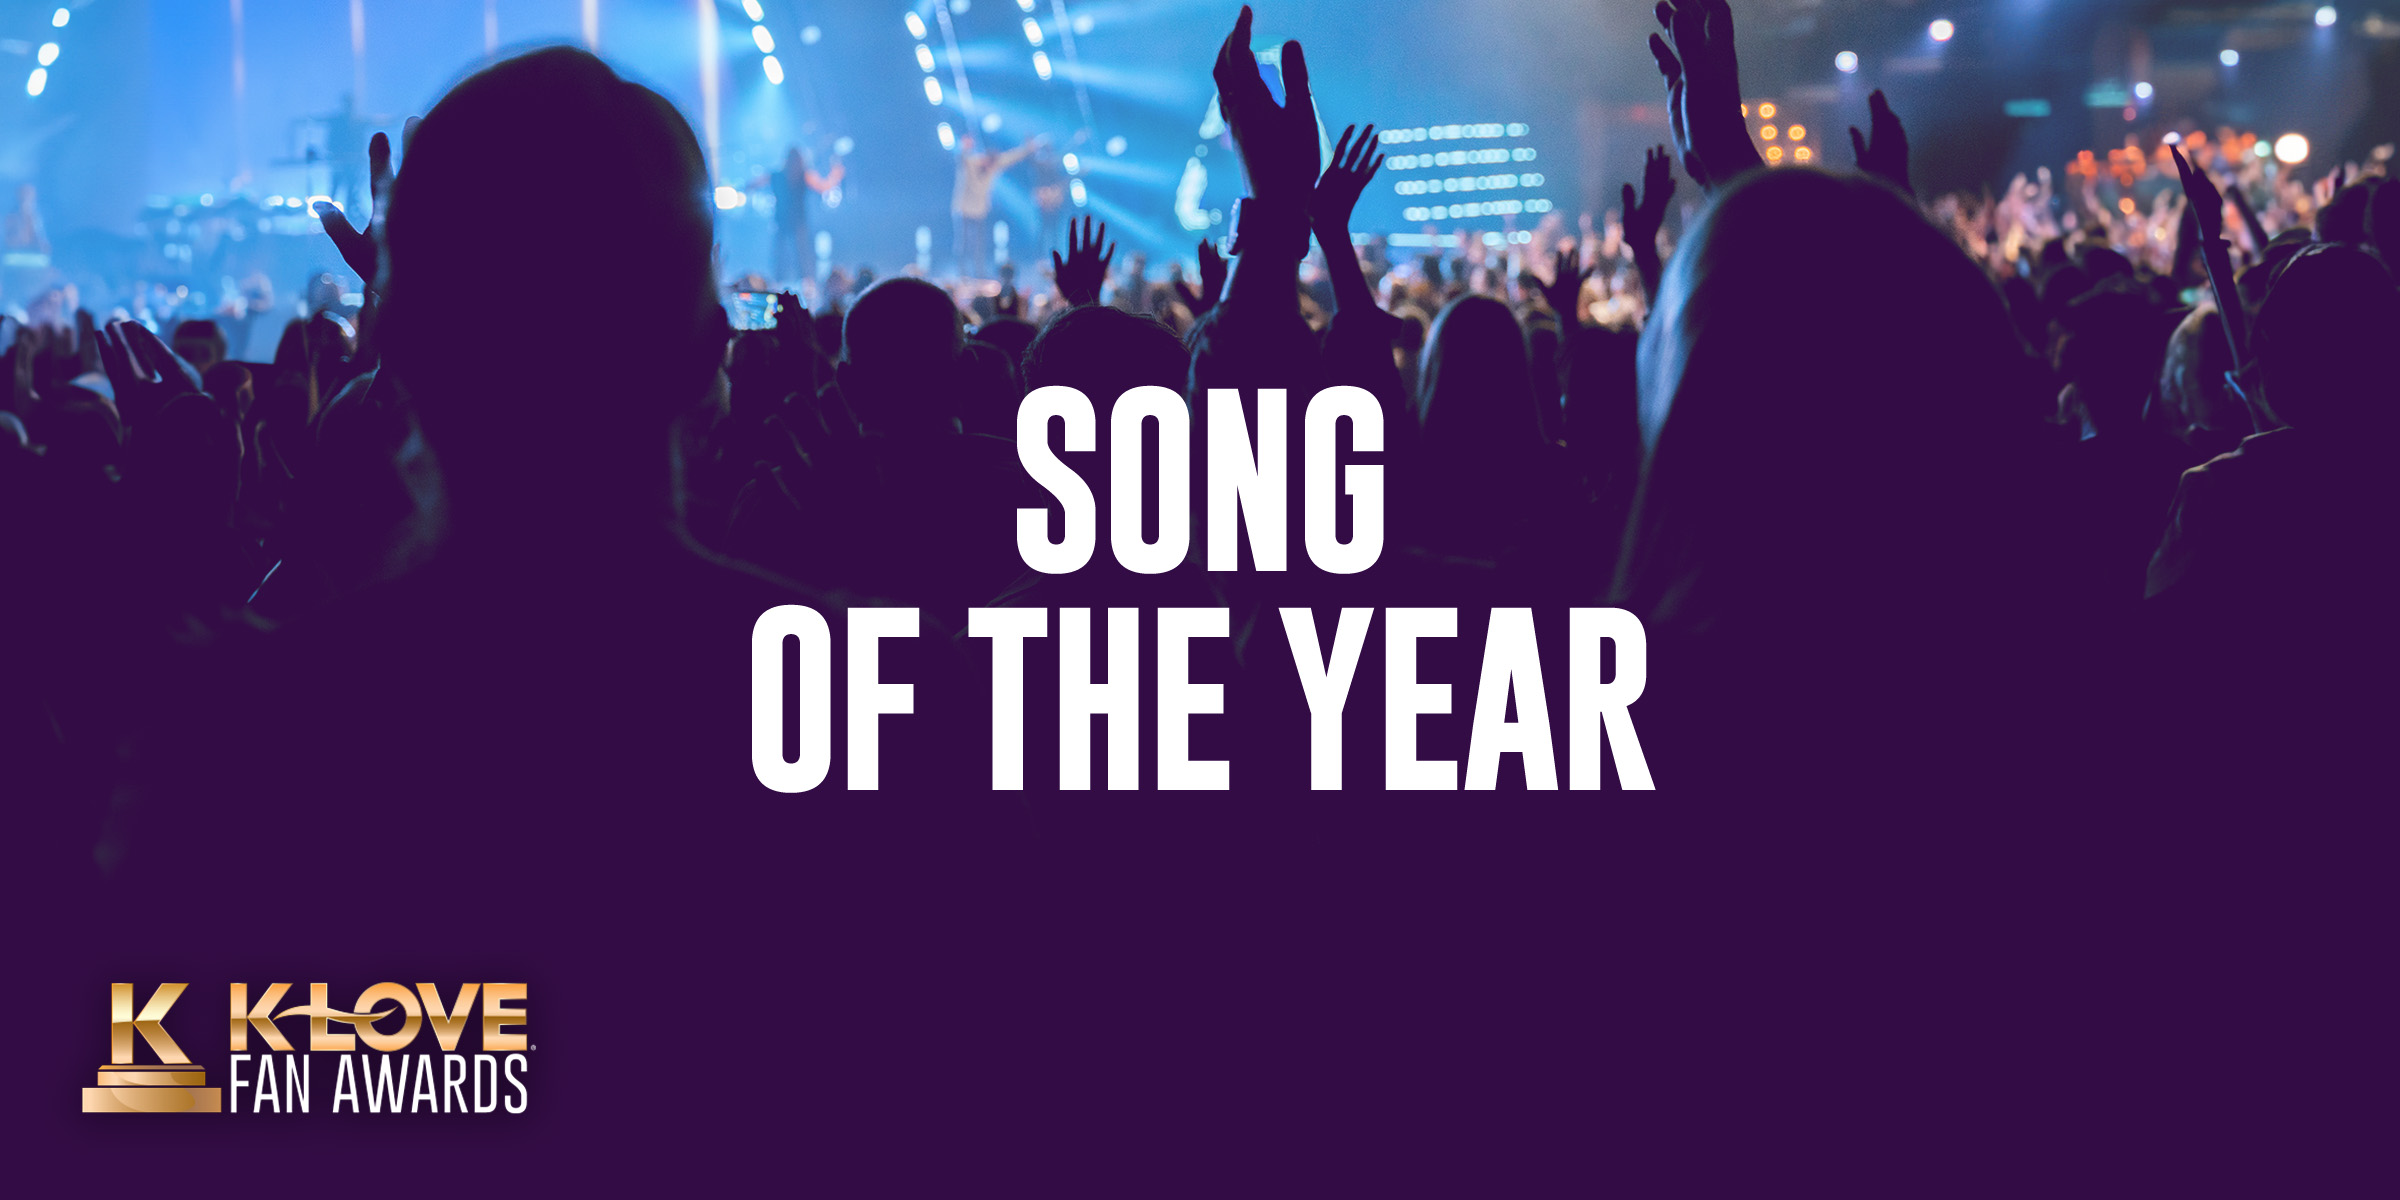 K-LOVE Fan Awards: Song of the Year